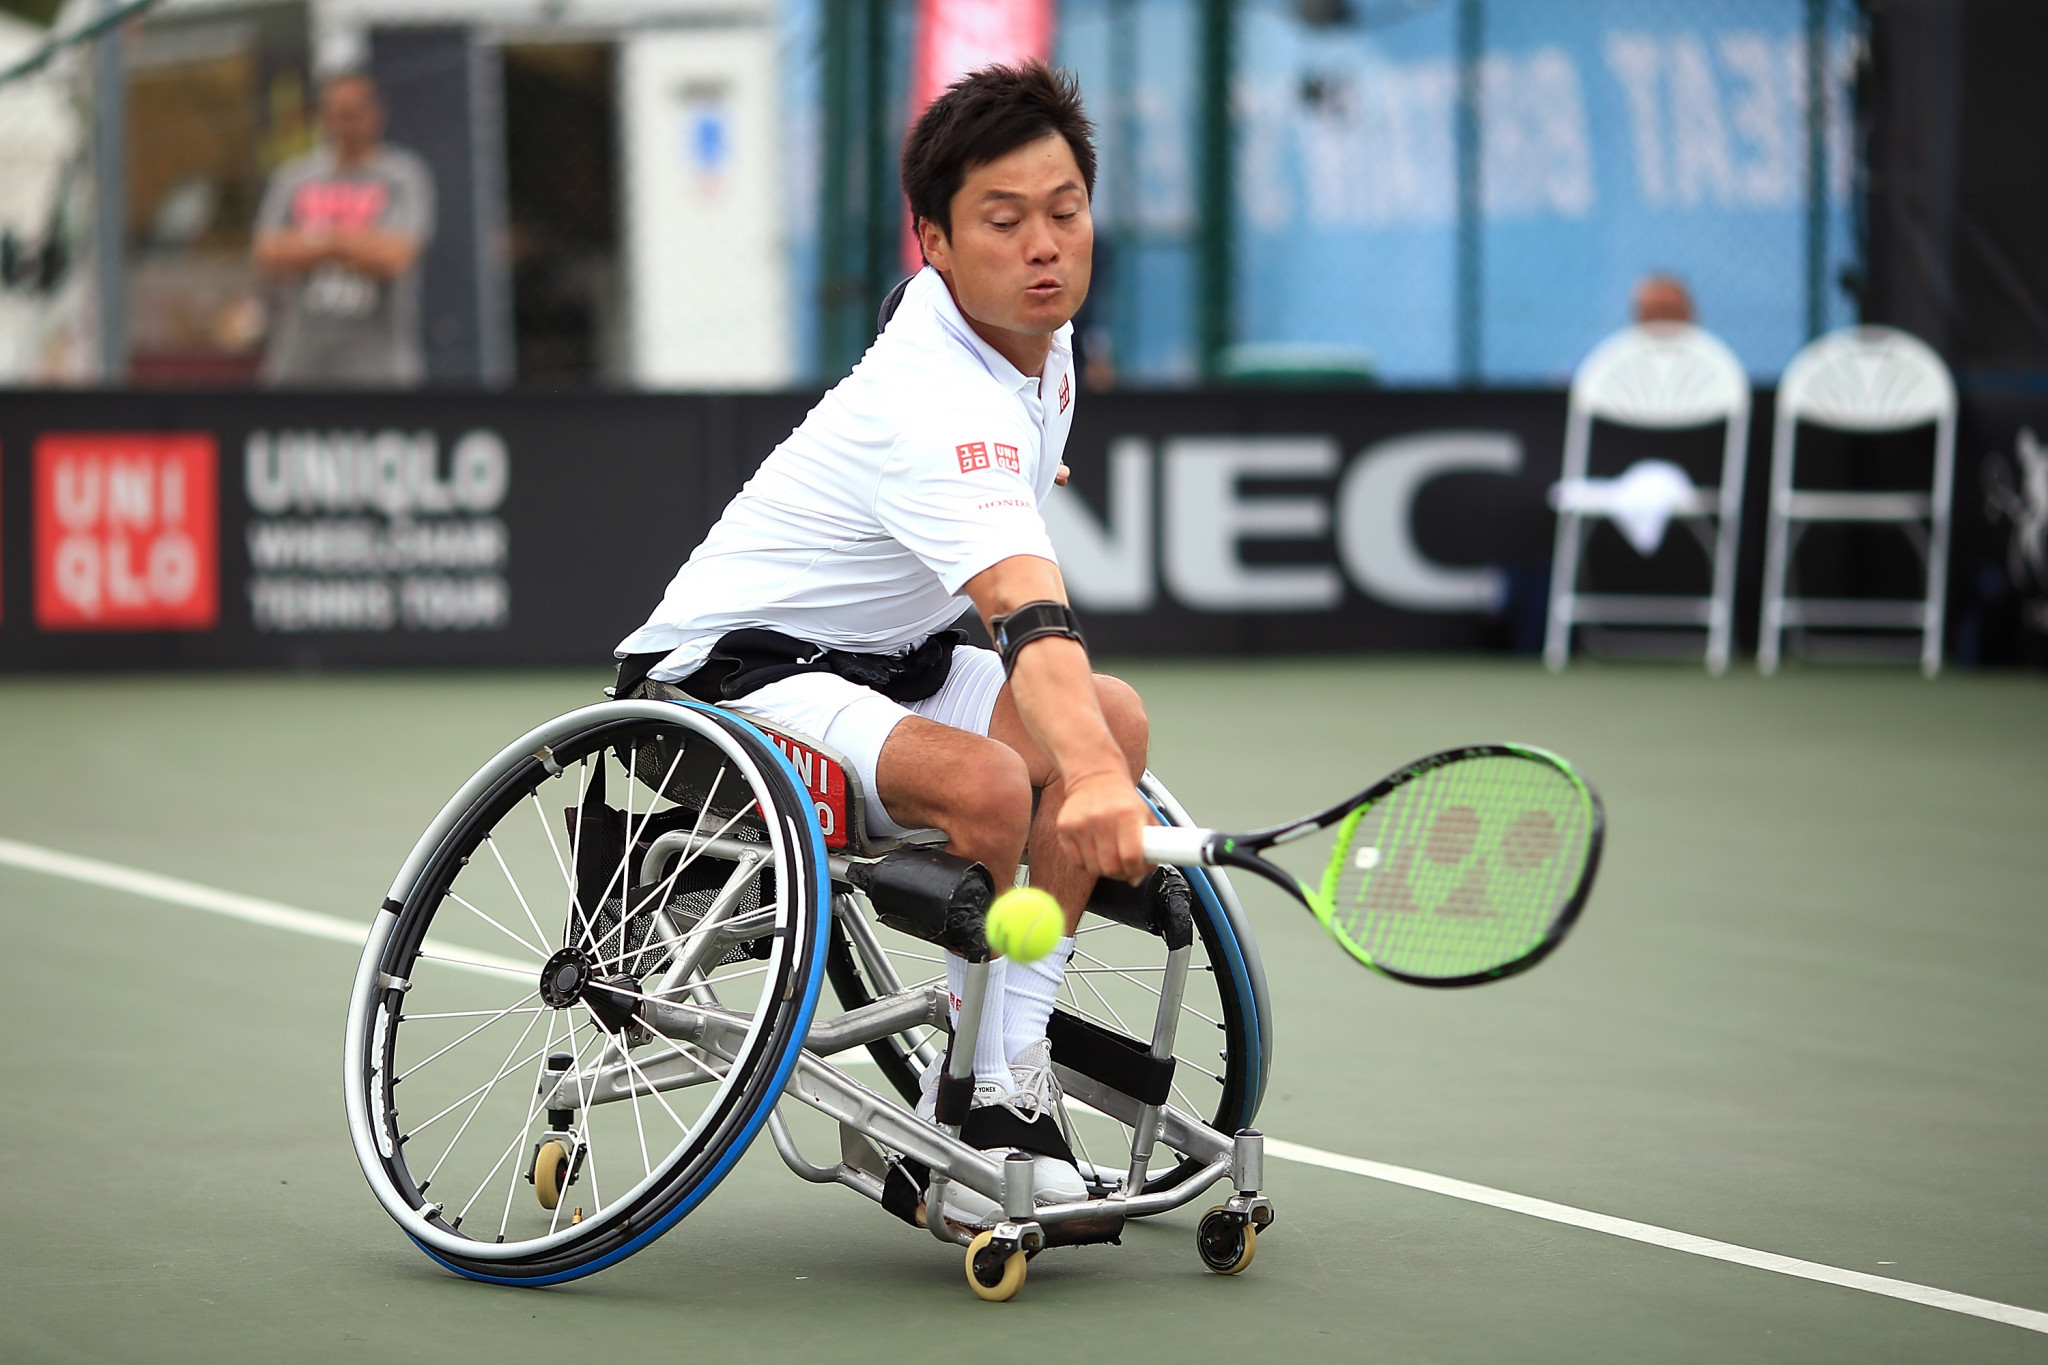 World number one Shingo Kunieda of Japan is through to the men's singles quarter-finals ©Getty Images